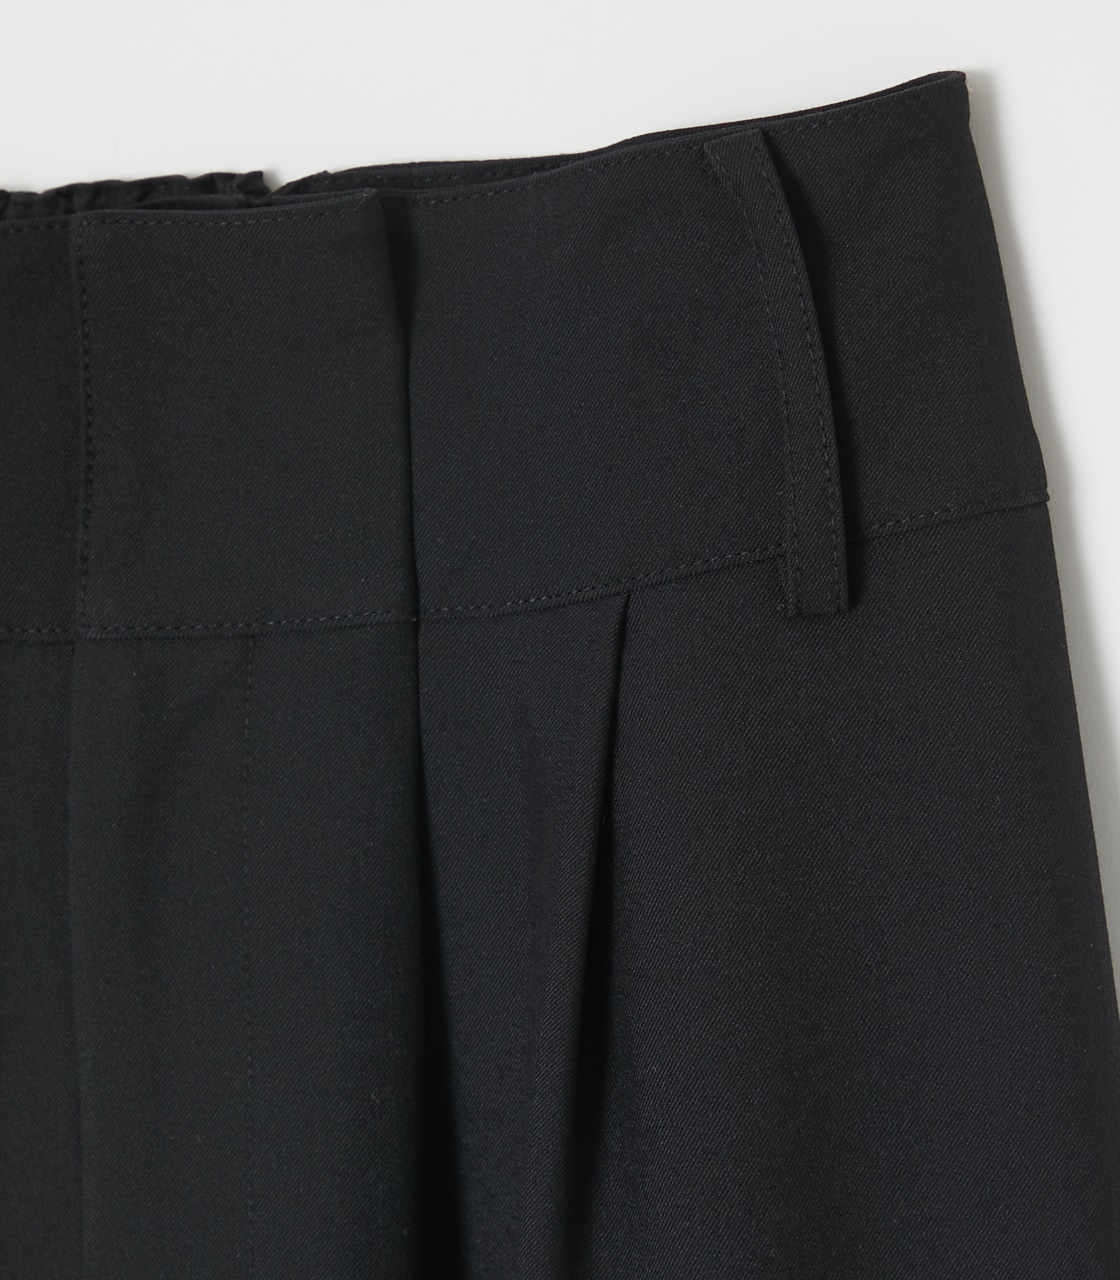 【PLUS】TUCK WIDE TROUSERS PANTS/タックワイドトラウザーパンツ 詳細画像 BLK 4